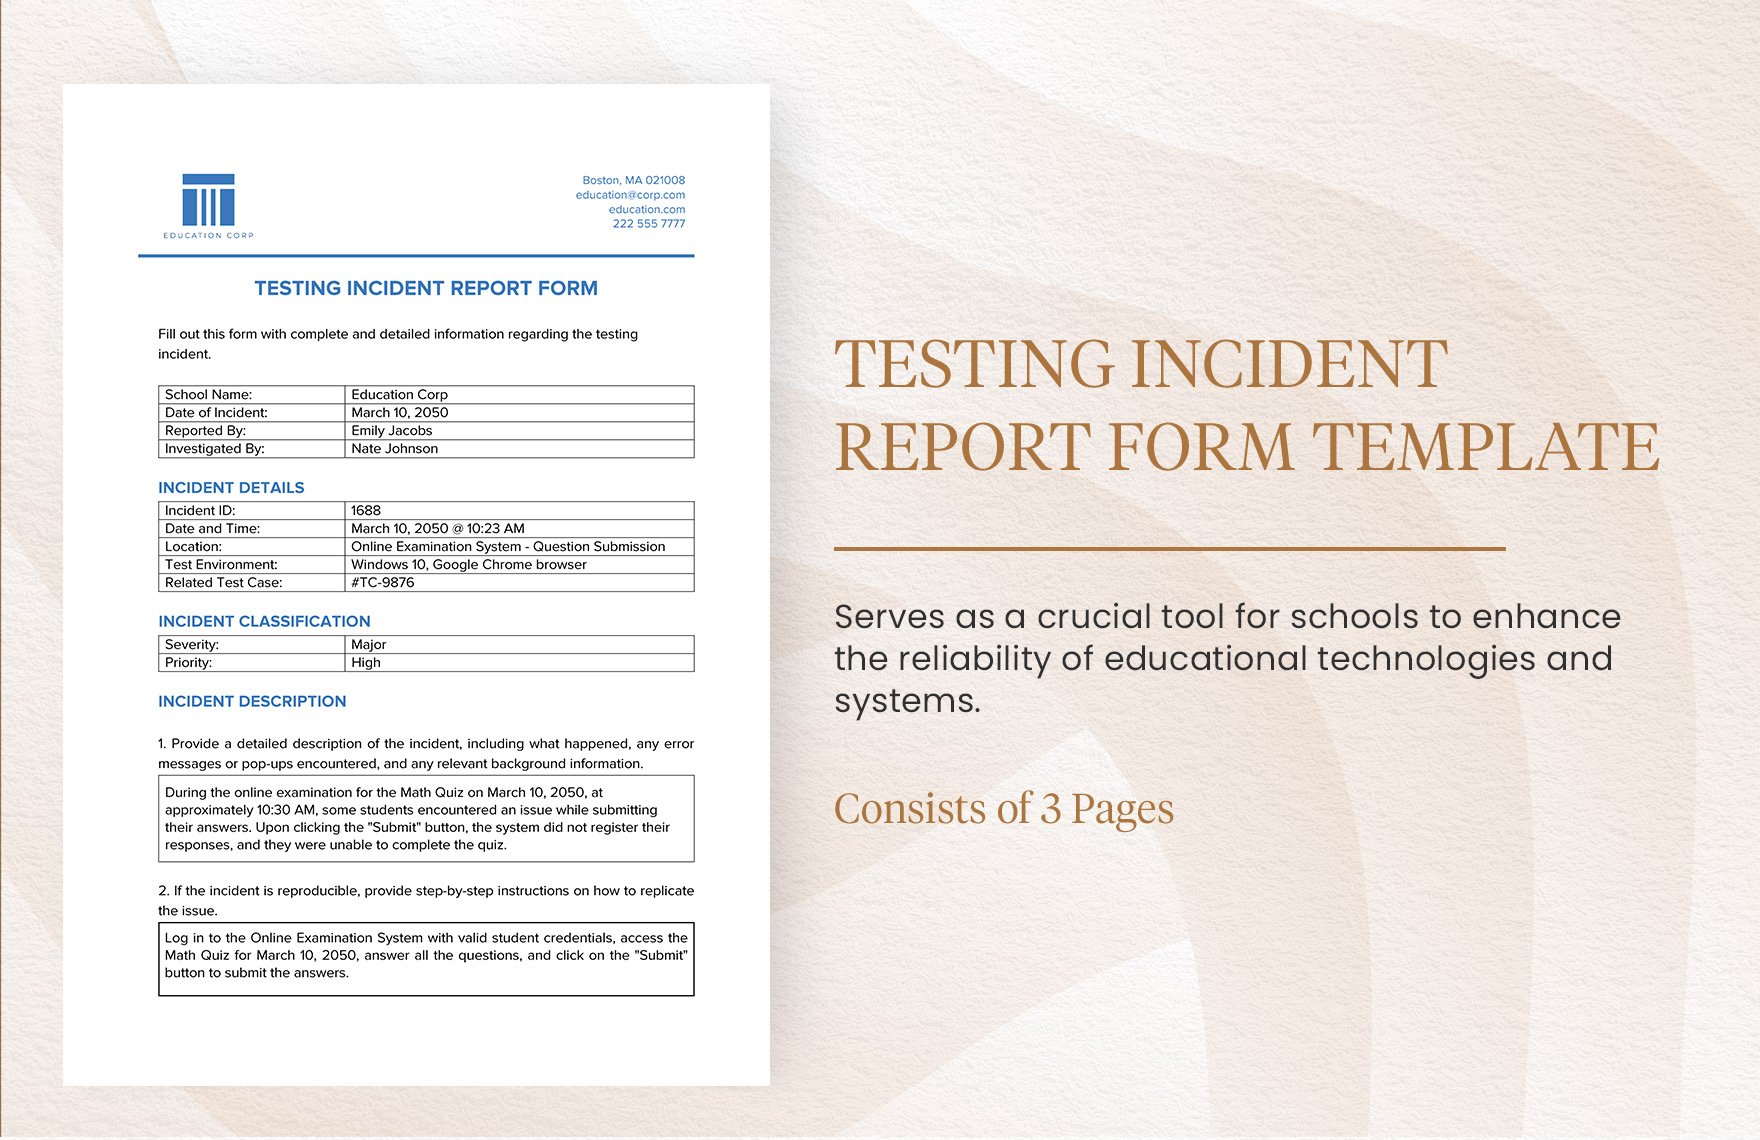 Testing Incident Report Form Template